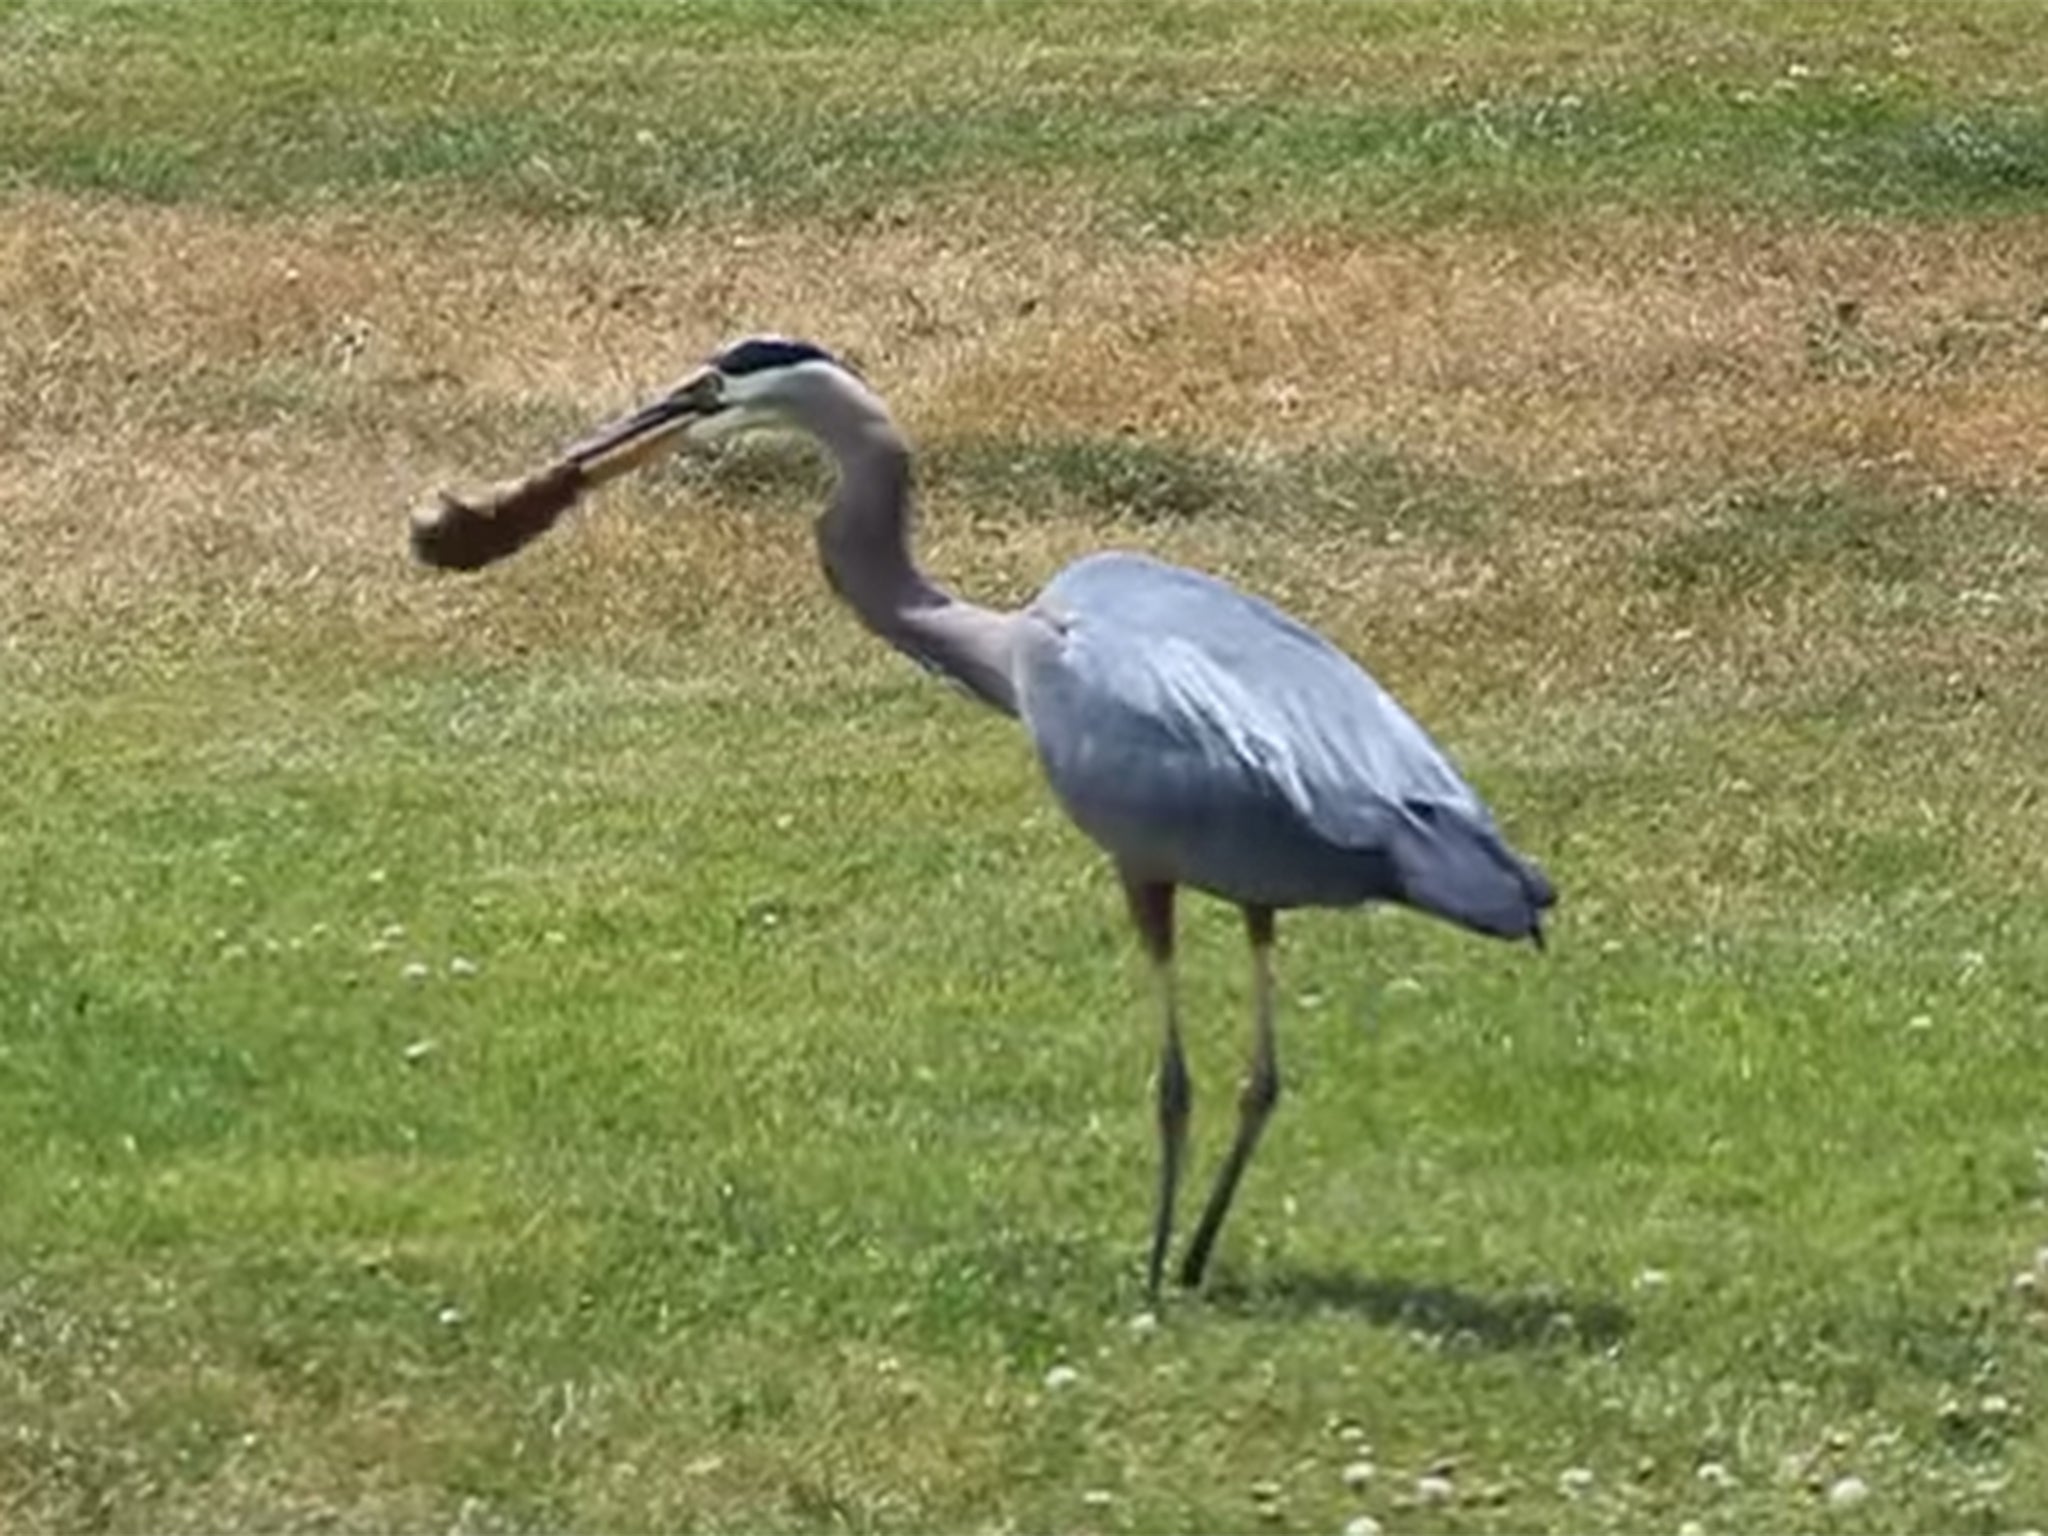 The blue heron wrangles with the gopher